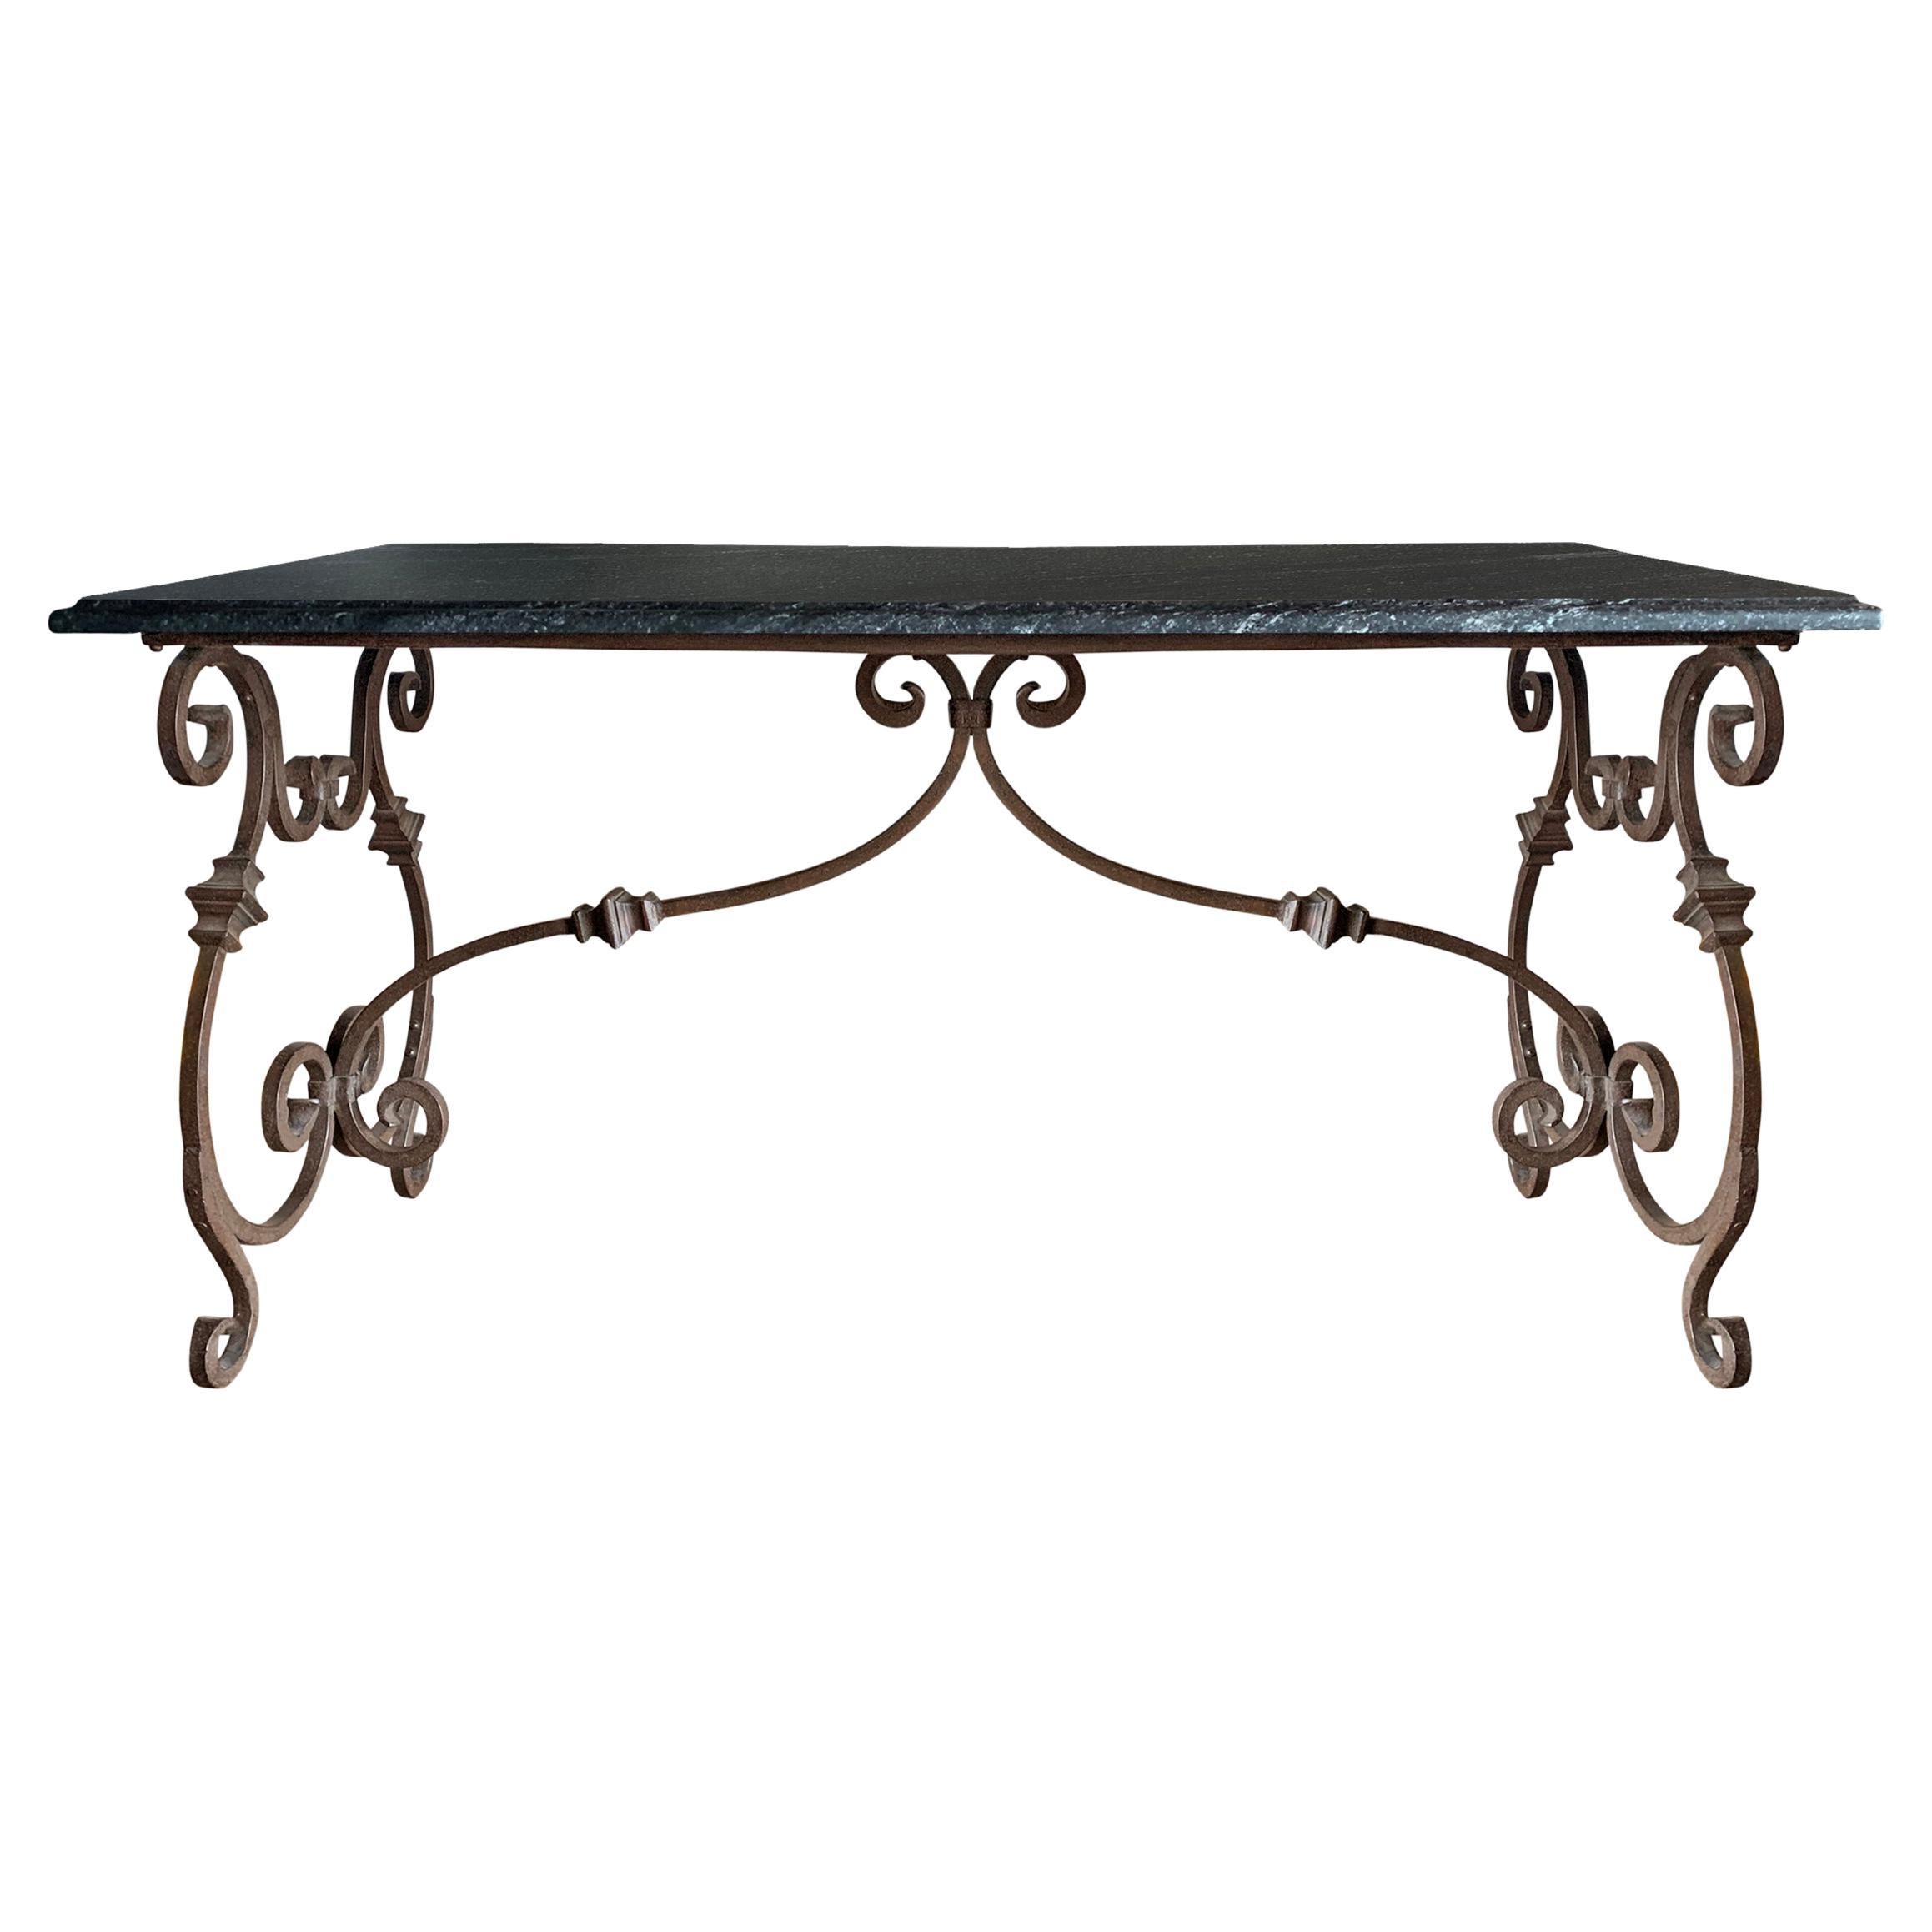 Italian Wrought Iron and Stone Top Table